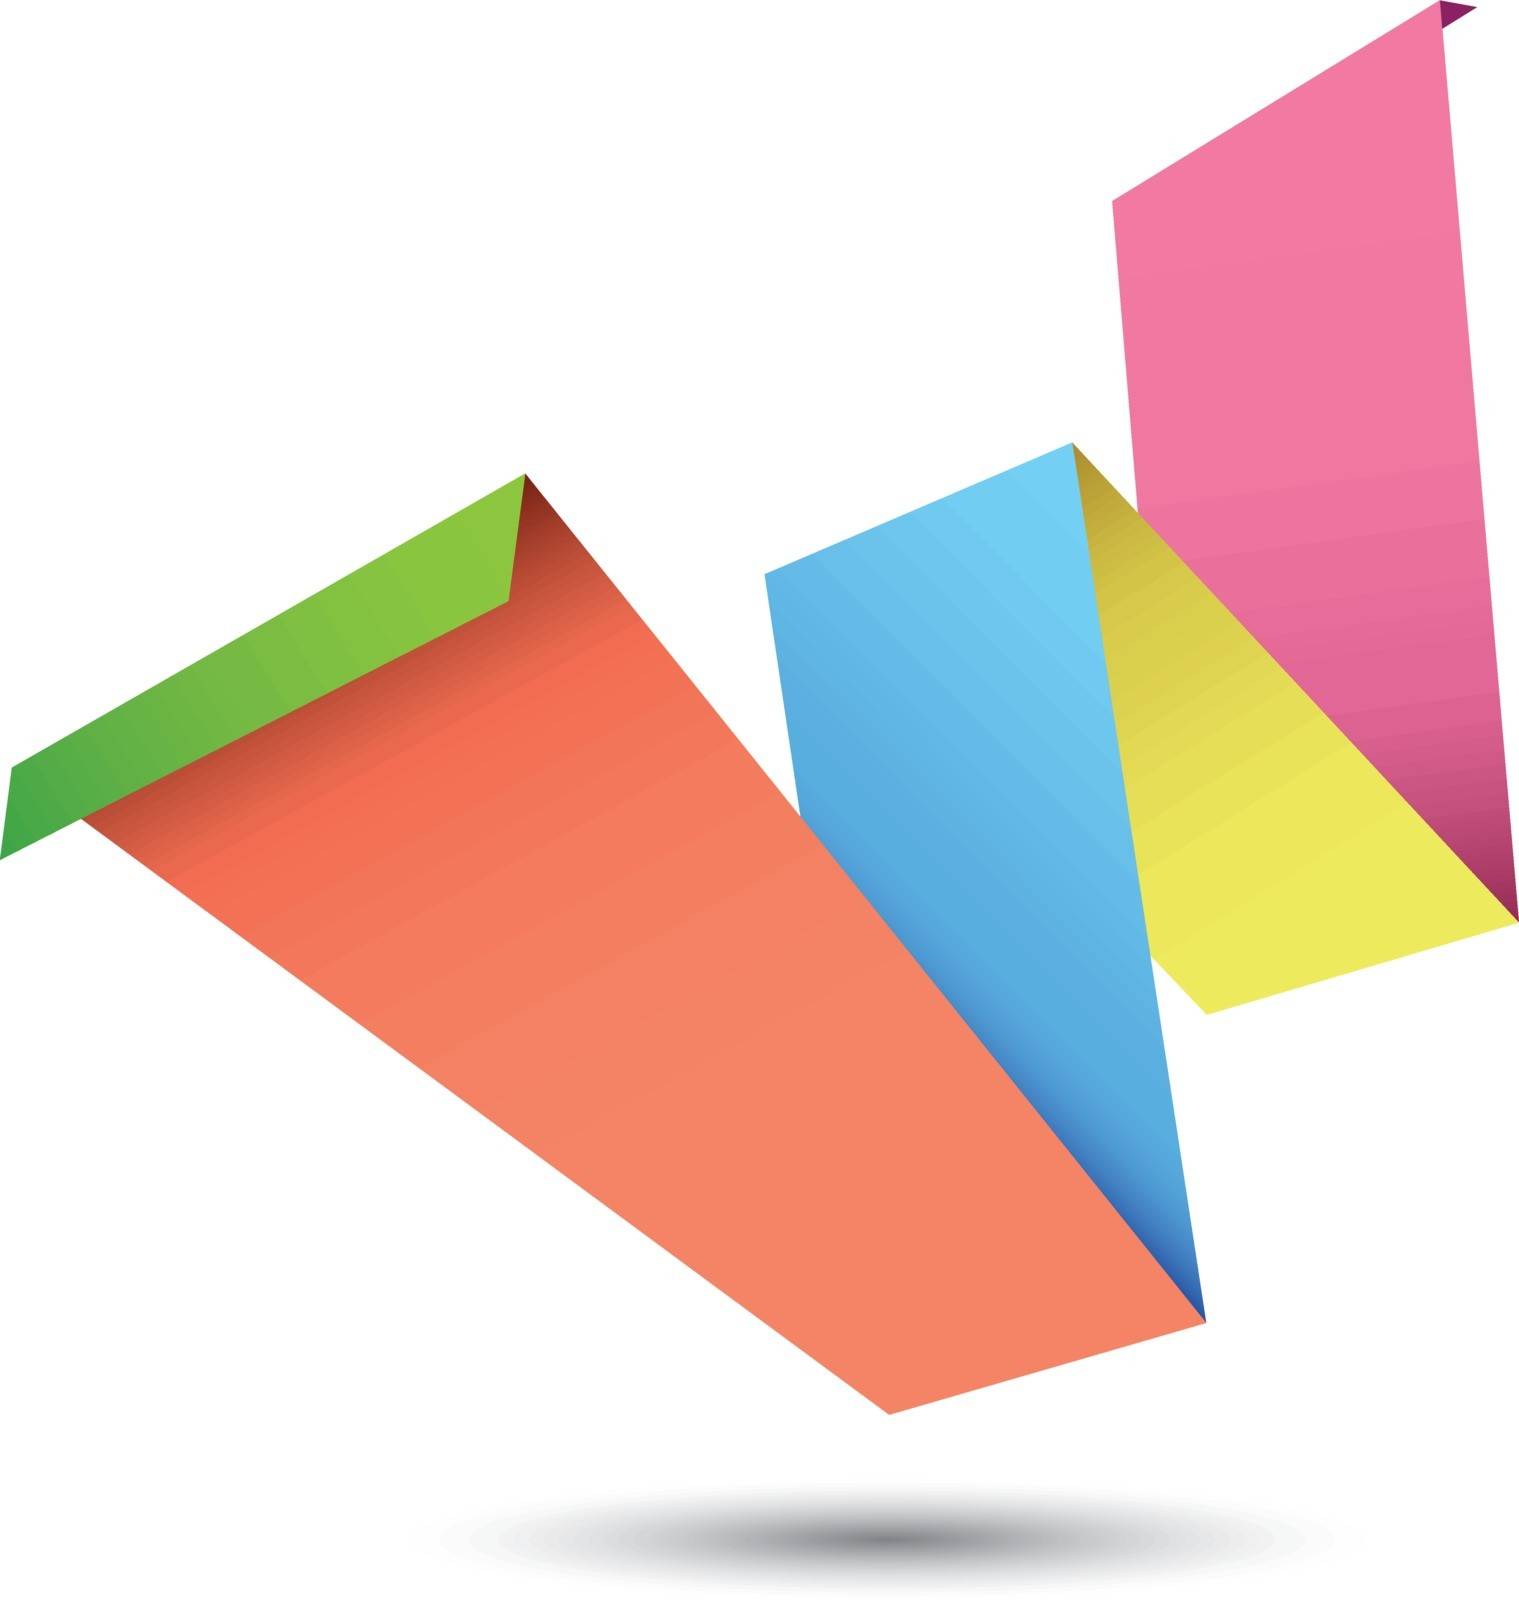 Abstract design element with the letter W, folded colorful paper concept